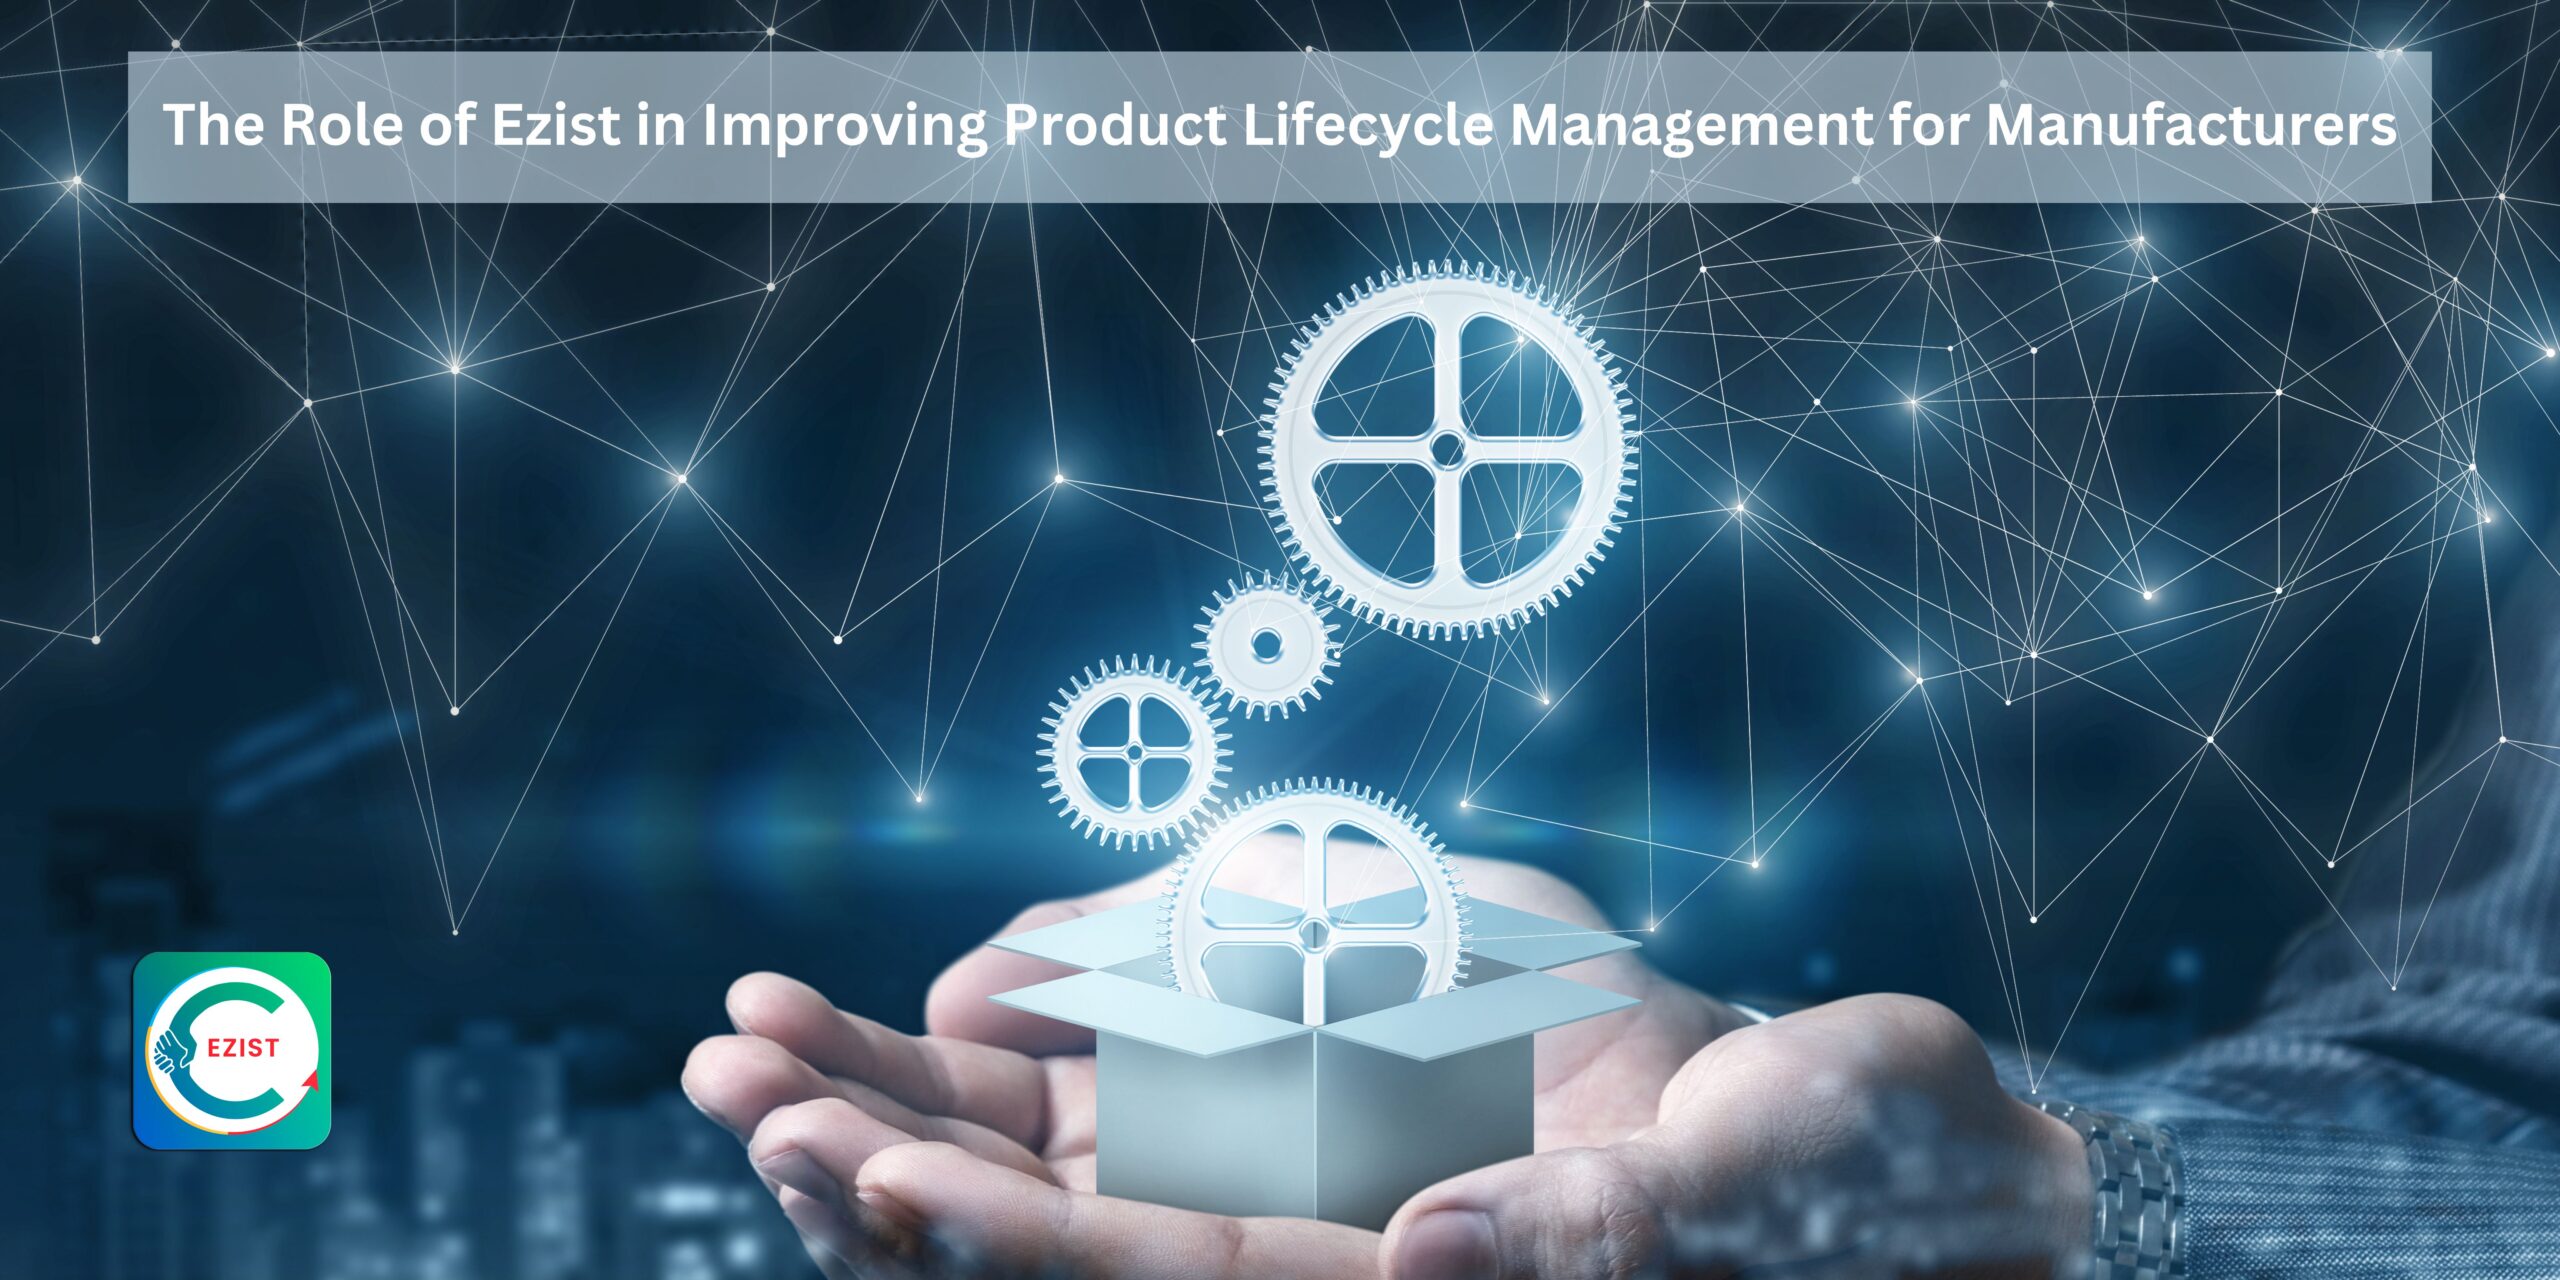 The Role of Ezist in Improving Product Lifecycle Management for Manufacturers